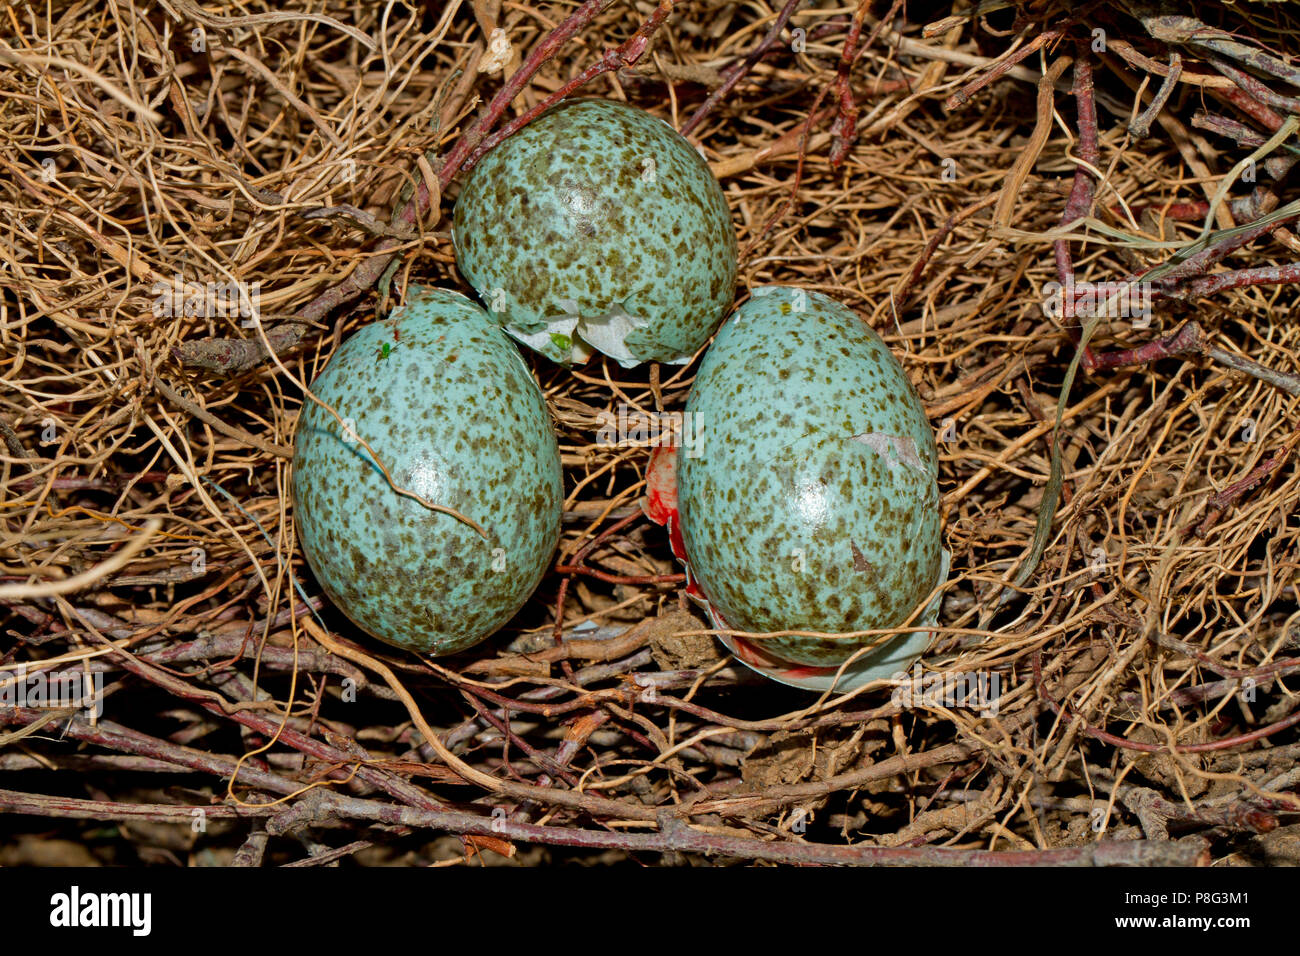 eurasian magpie, nest of eggs, breaking open, (Pica pica) Stock Photo